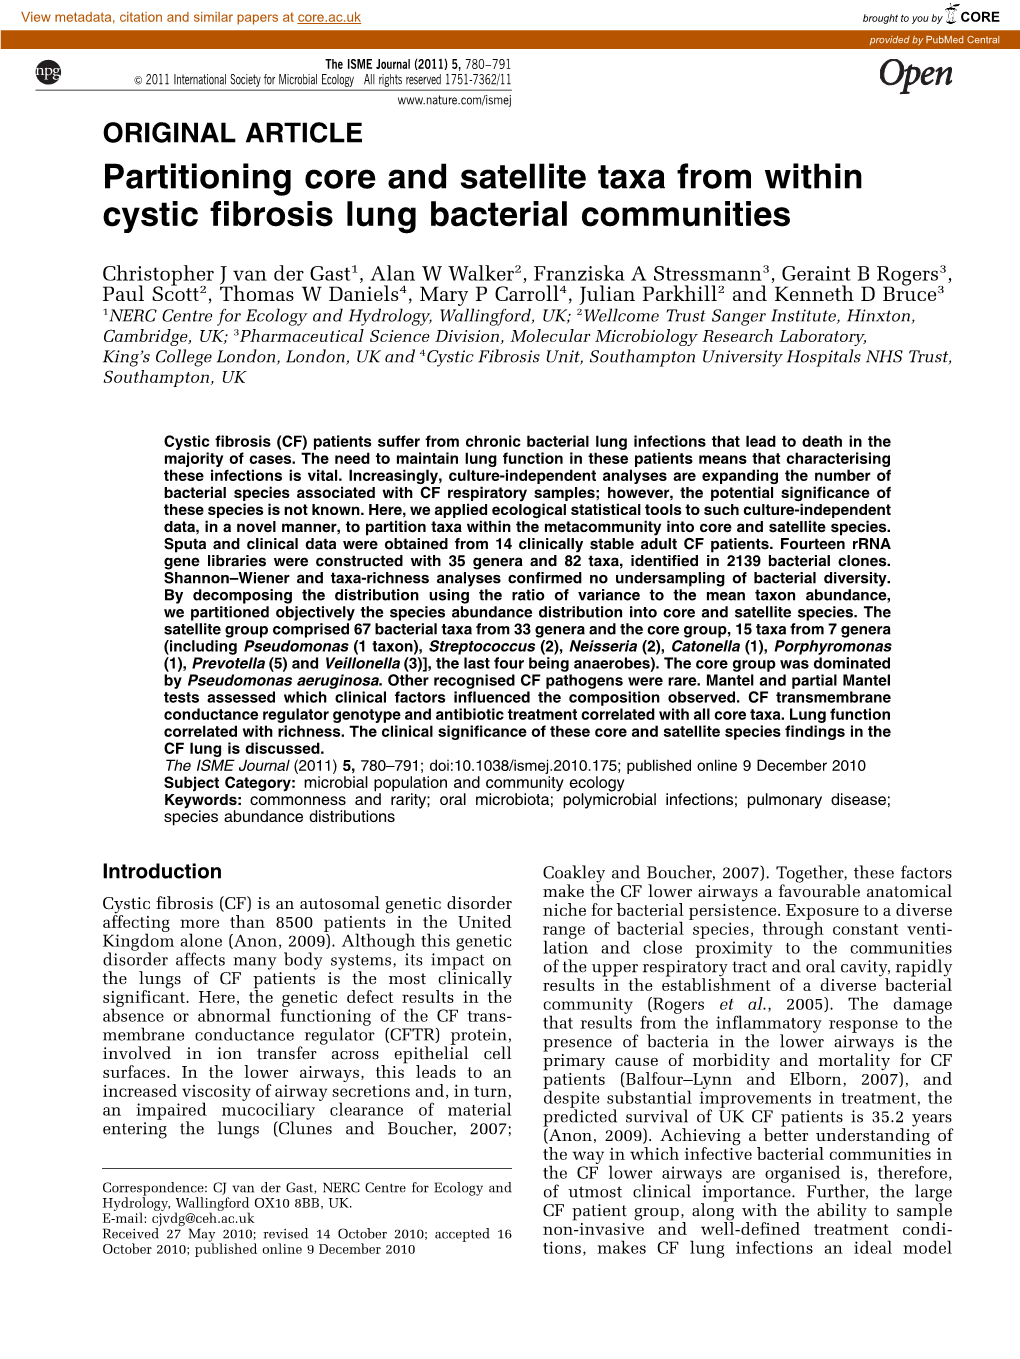 Partitioning Core and Satellite Taxa from Within Cystic Fibrosis Lung Bacterial Communities